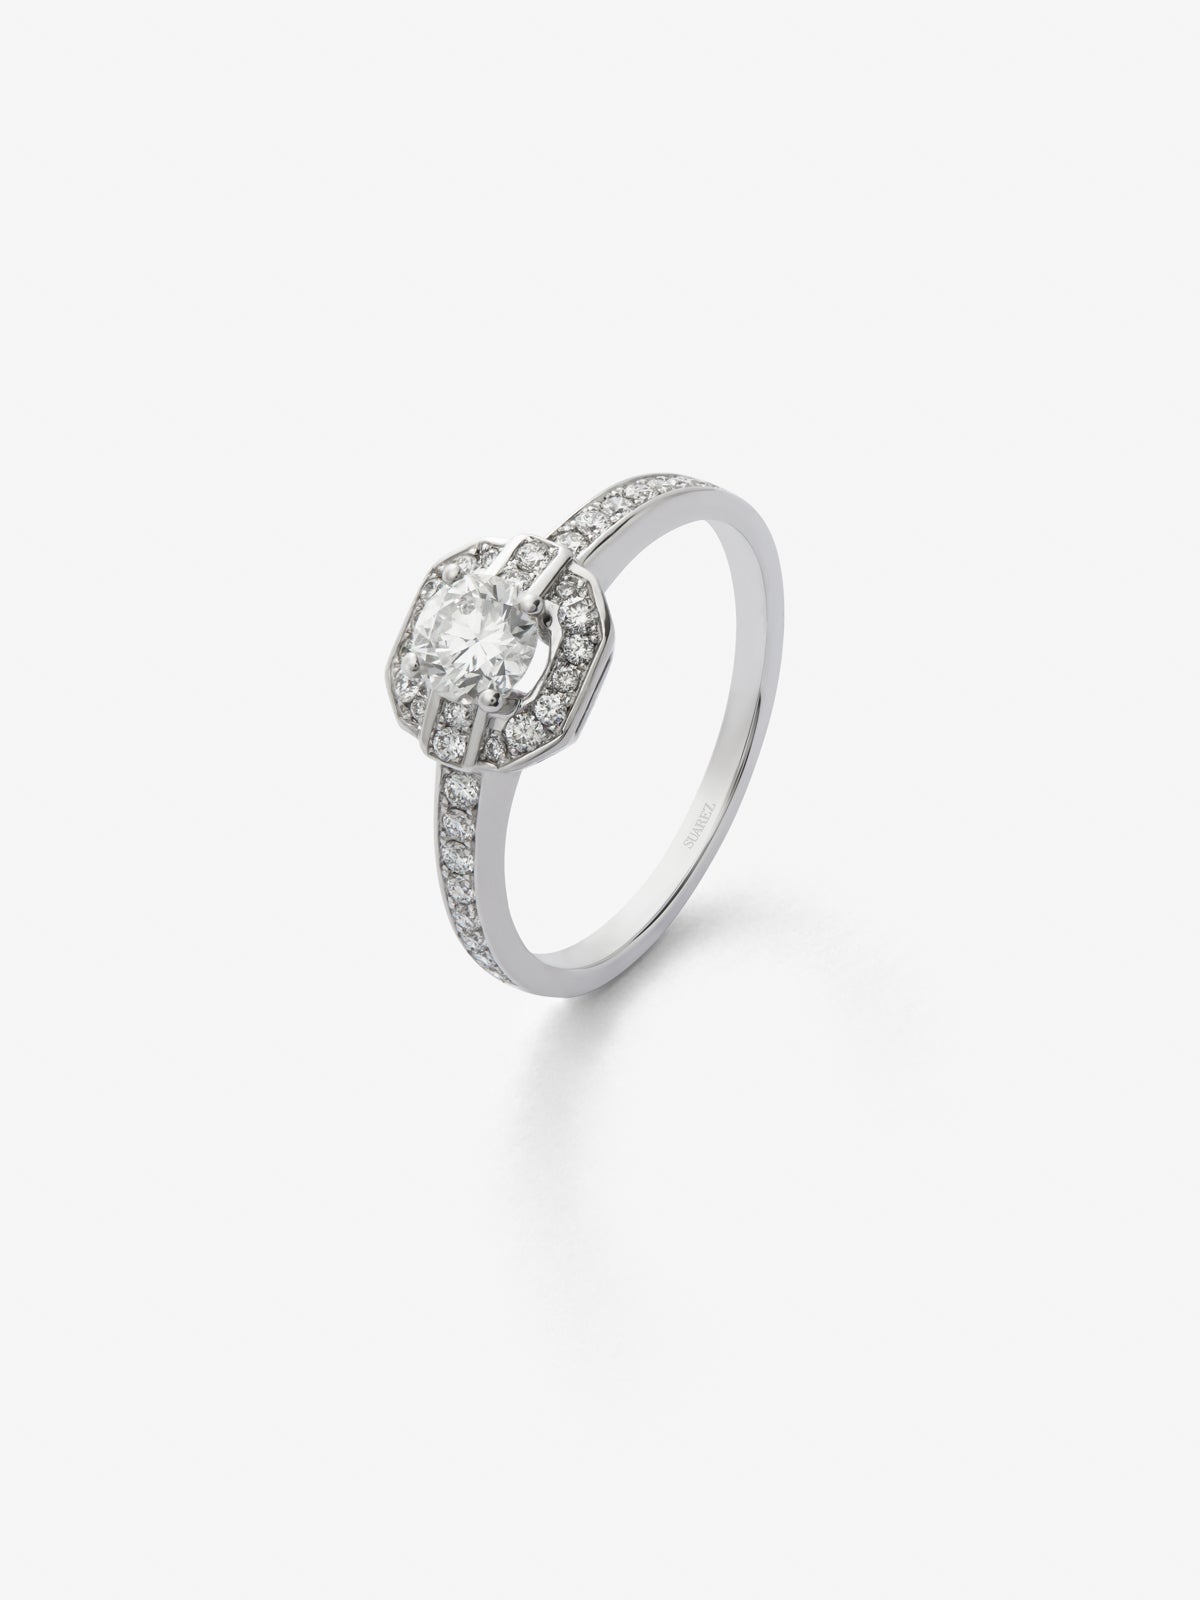 18K white gold ring with a central brilliant-cut diamond of 0.4 cts and 34 brilliant-cut diamonds with a total of 0.24 cts